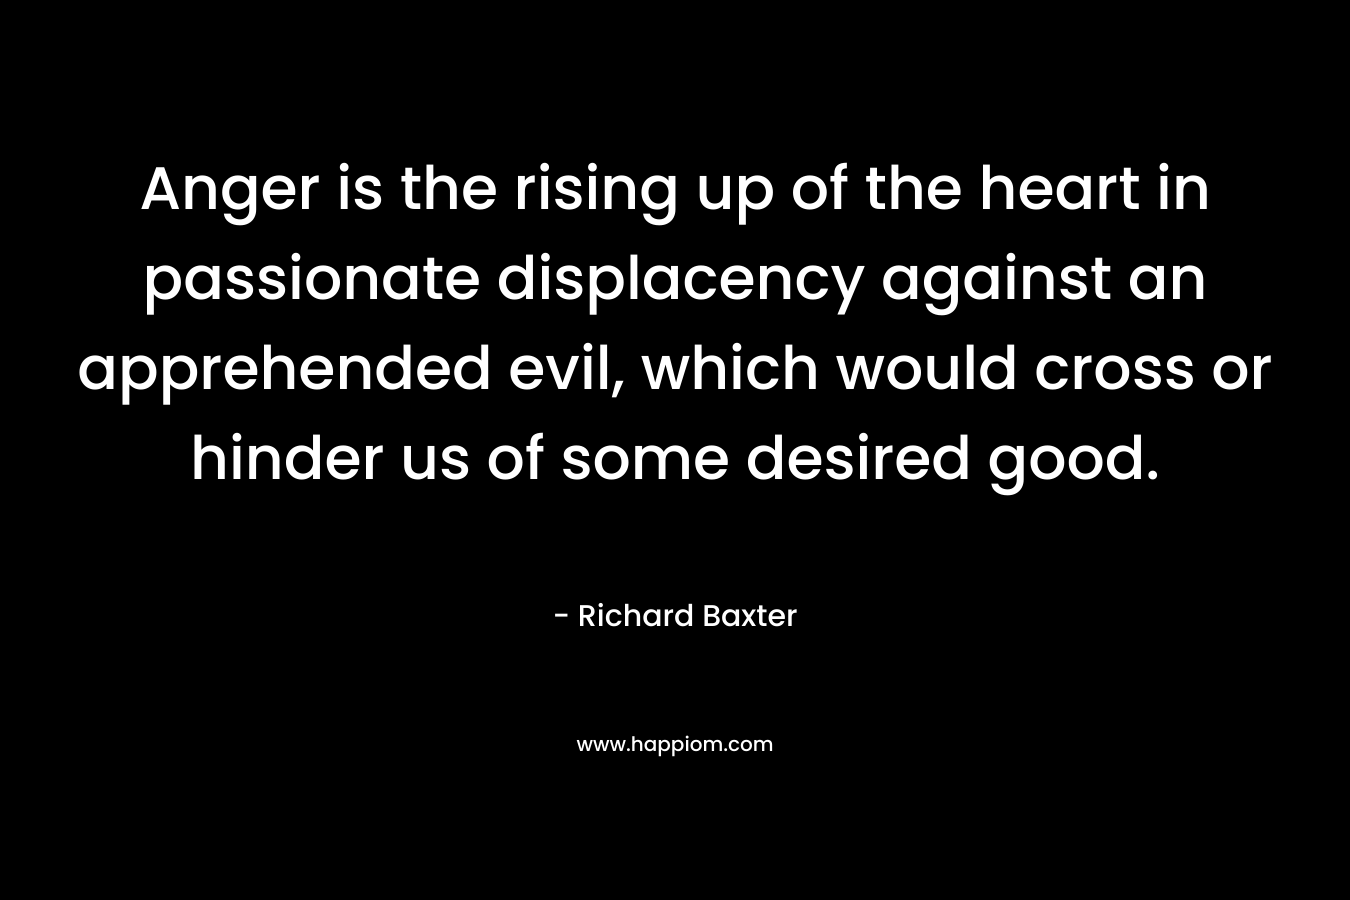 Anger is the rising up of the heart in passionate displacency against an apprehended evil, which would cross or hinder us of some desired good. – Richard Baxter